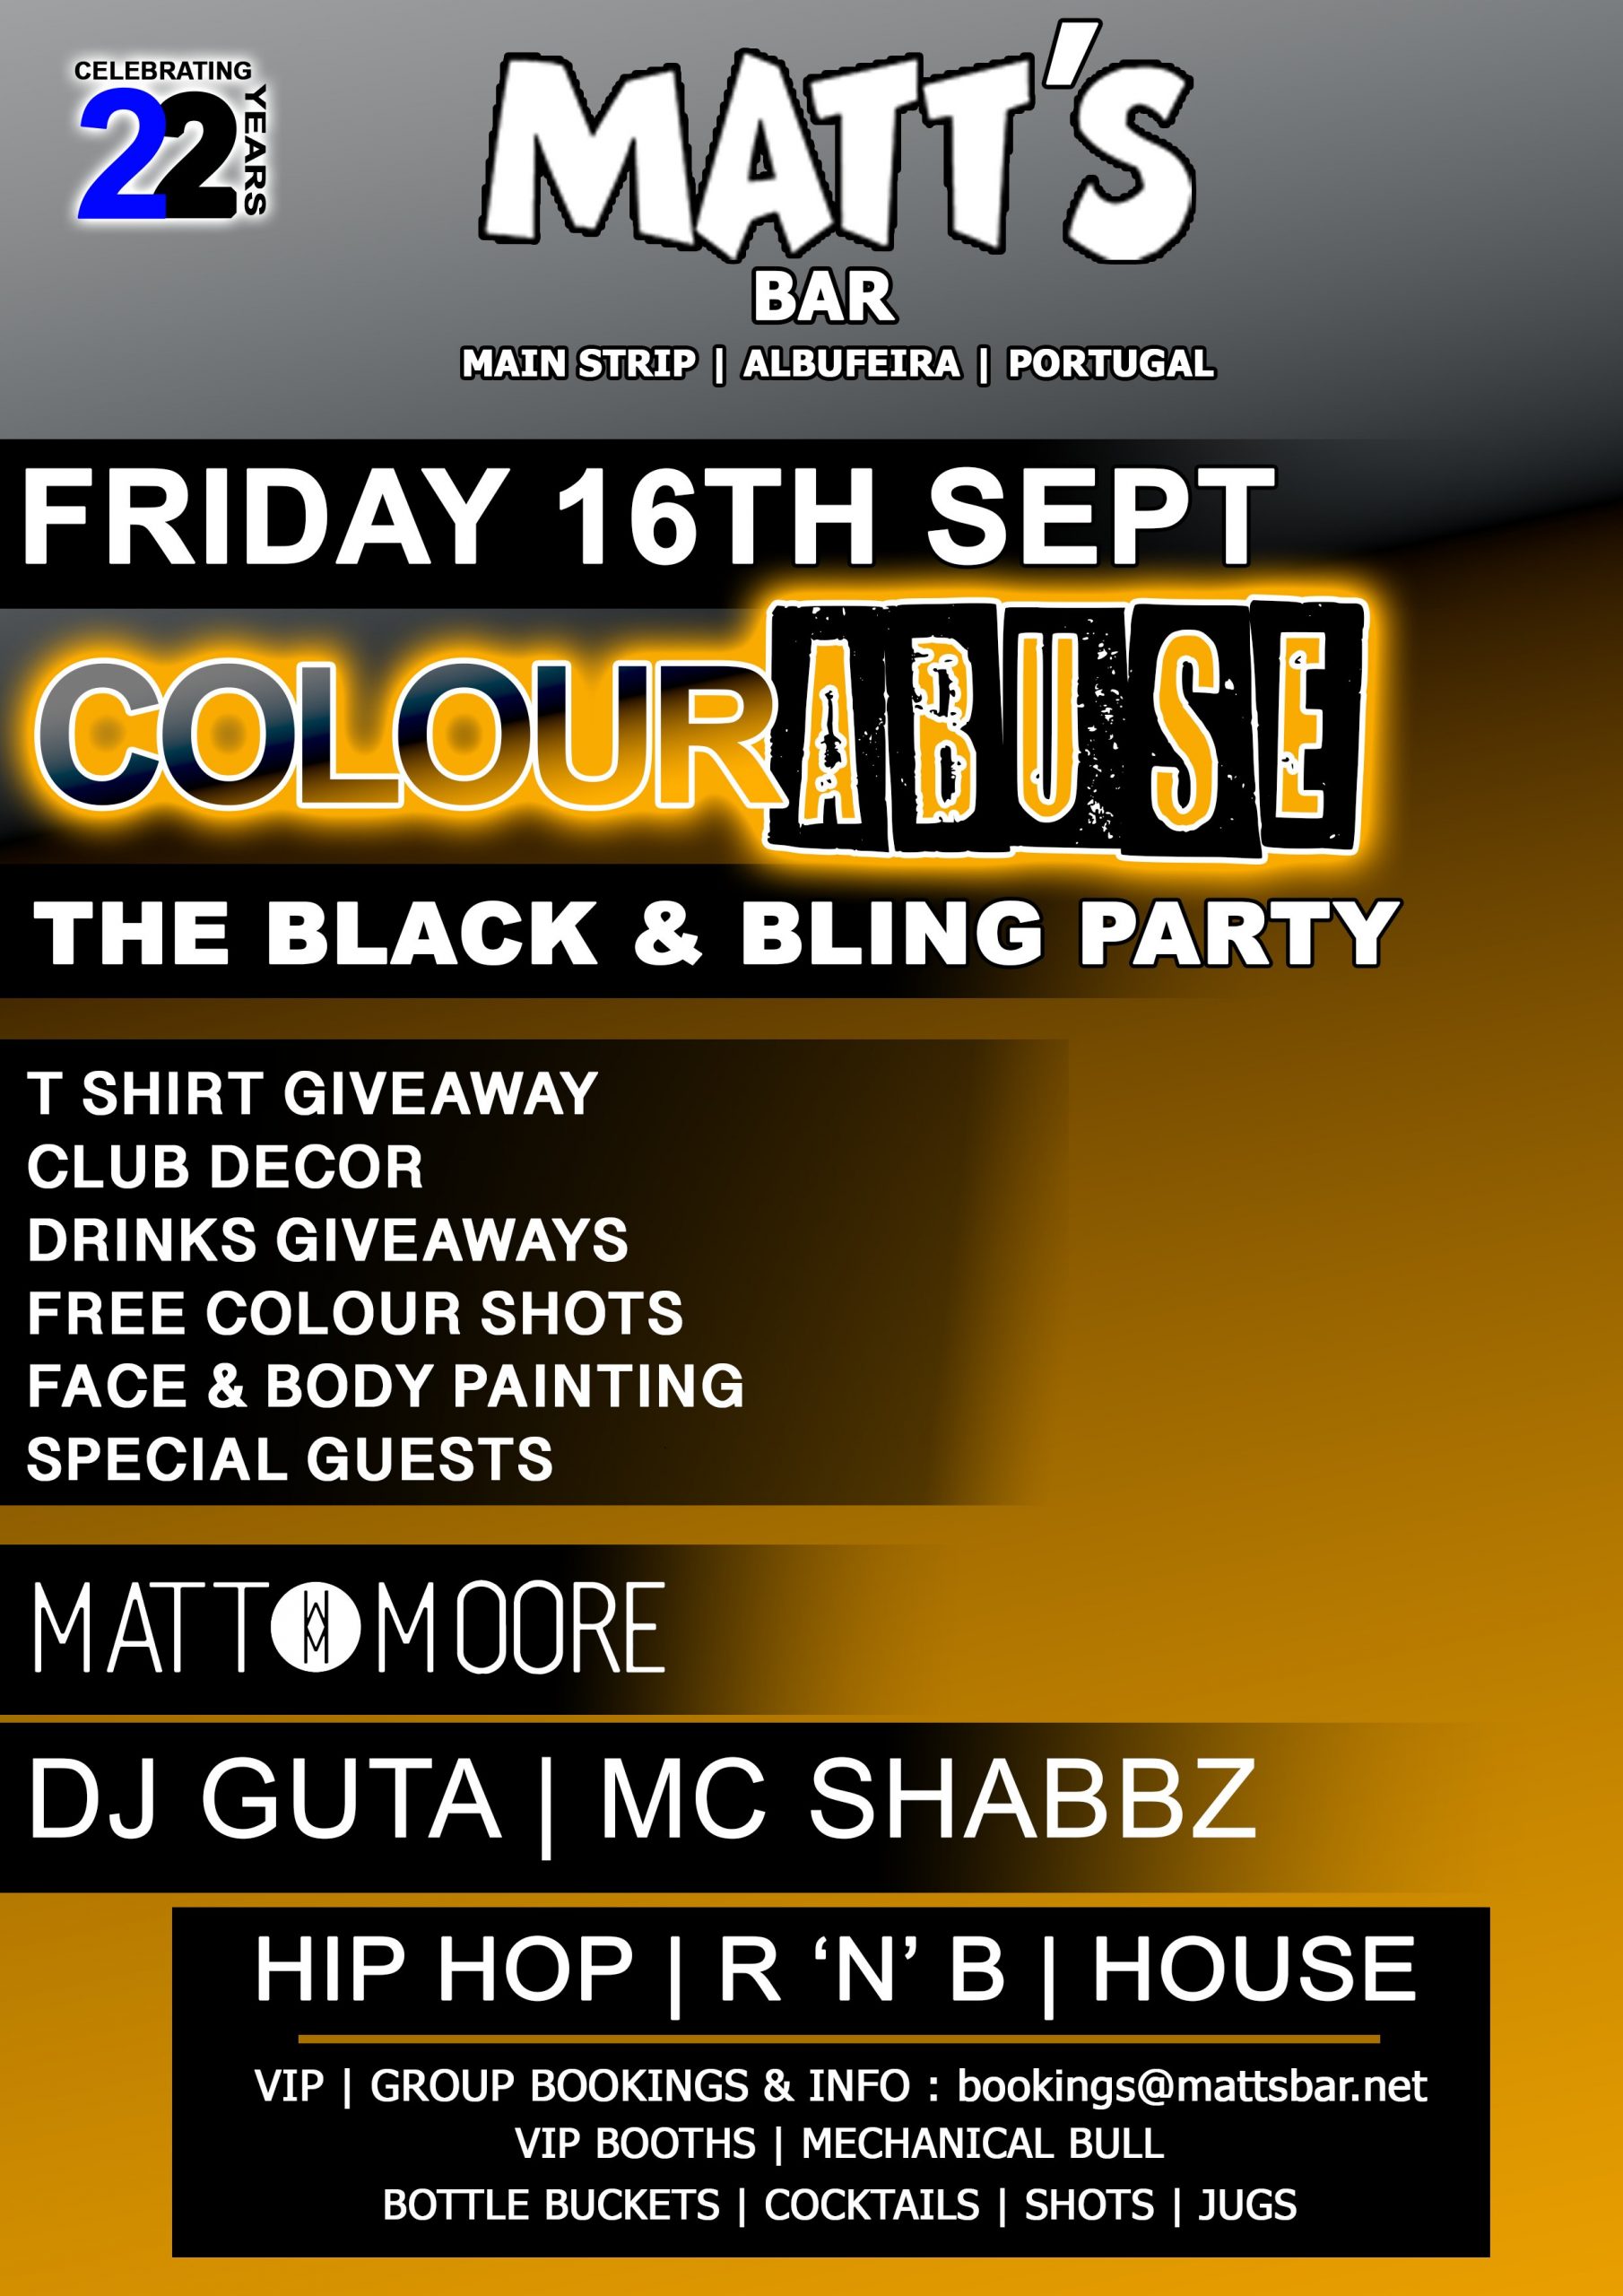 COLOUR ABUSE – THE BLACK & BLING PARTY